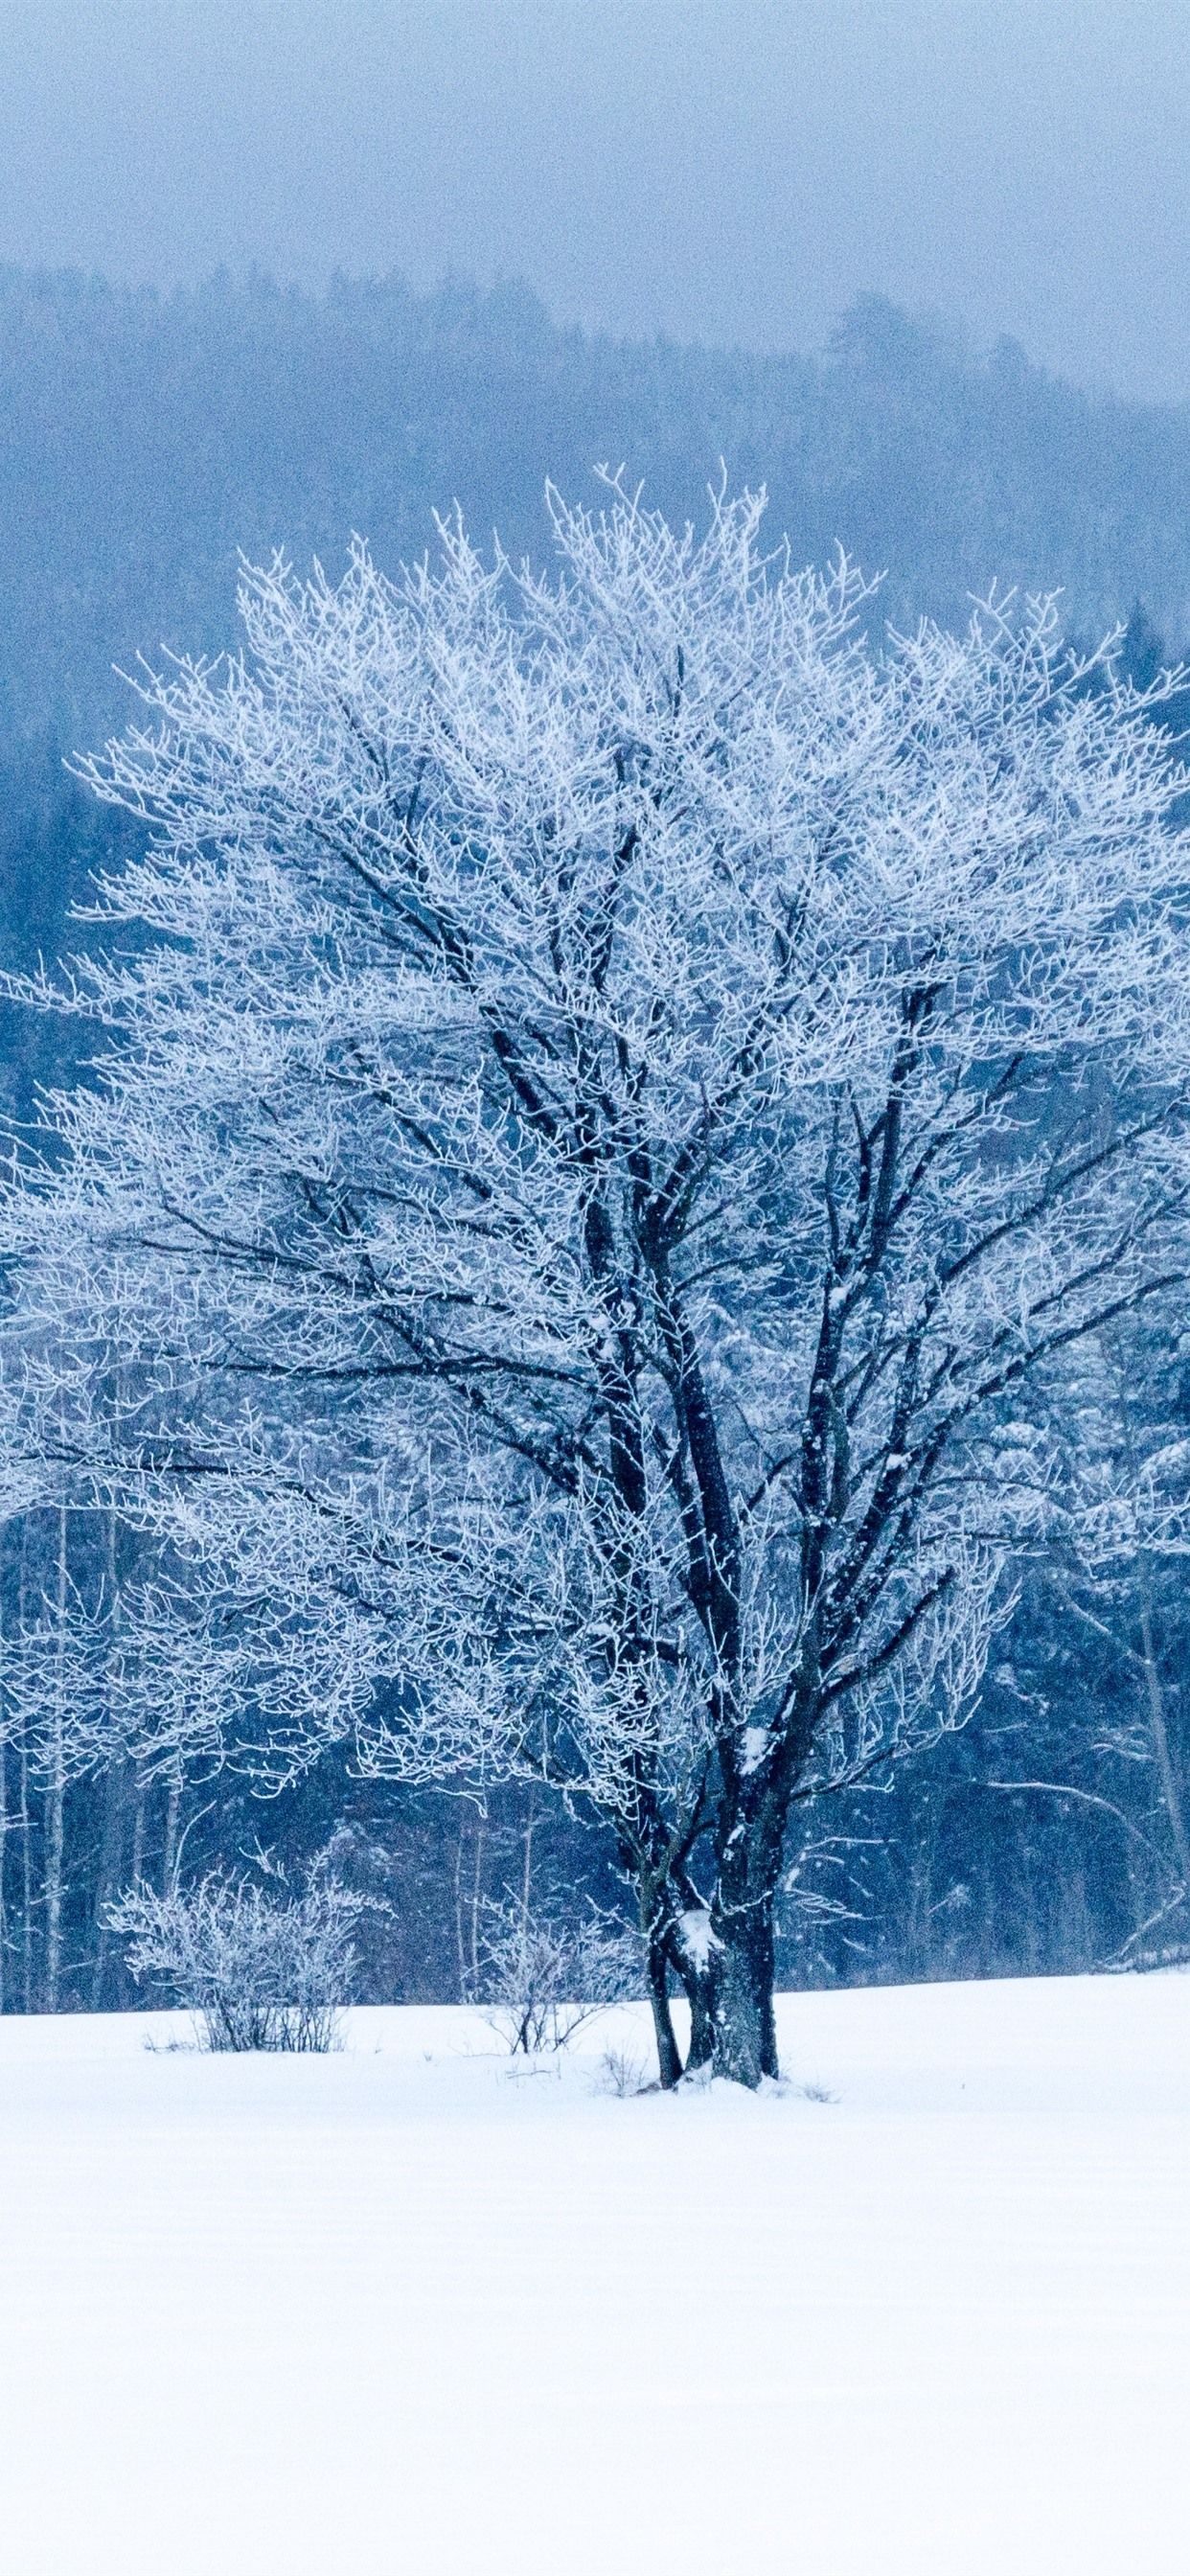 Winter, snow, trees, white world 1242x2688 iPhone 11 Pro/XS Max wallpaper, background, picture, image